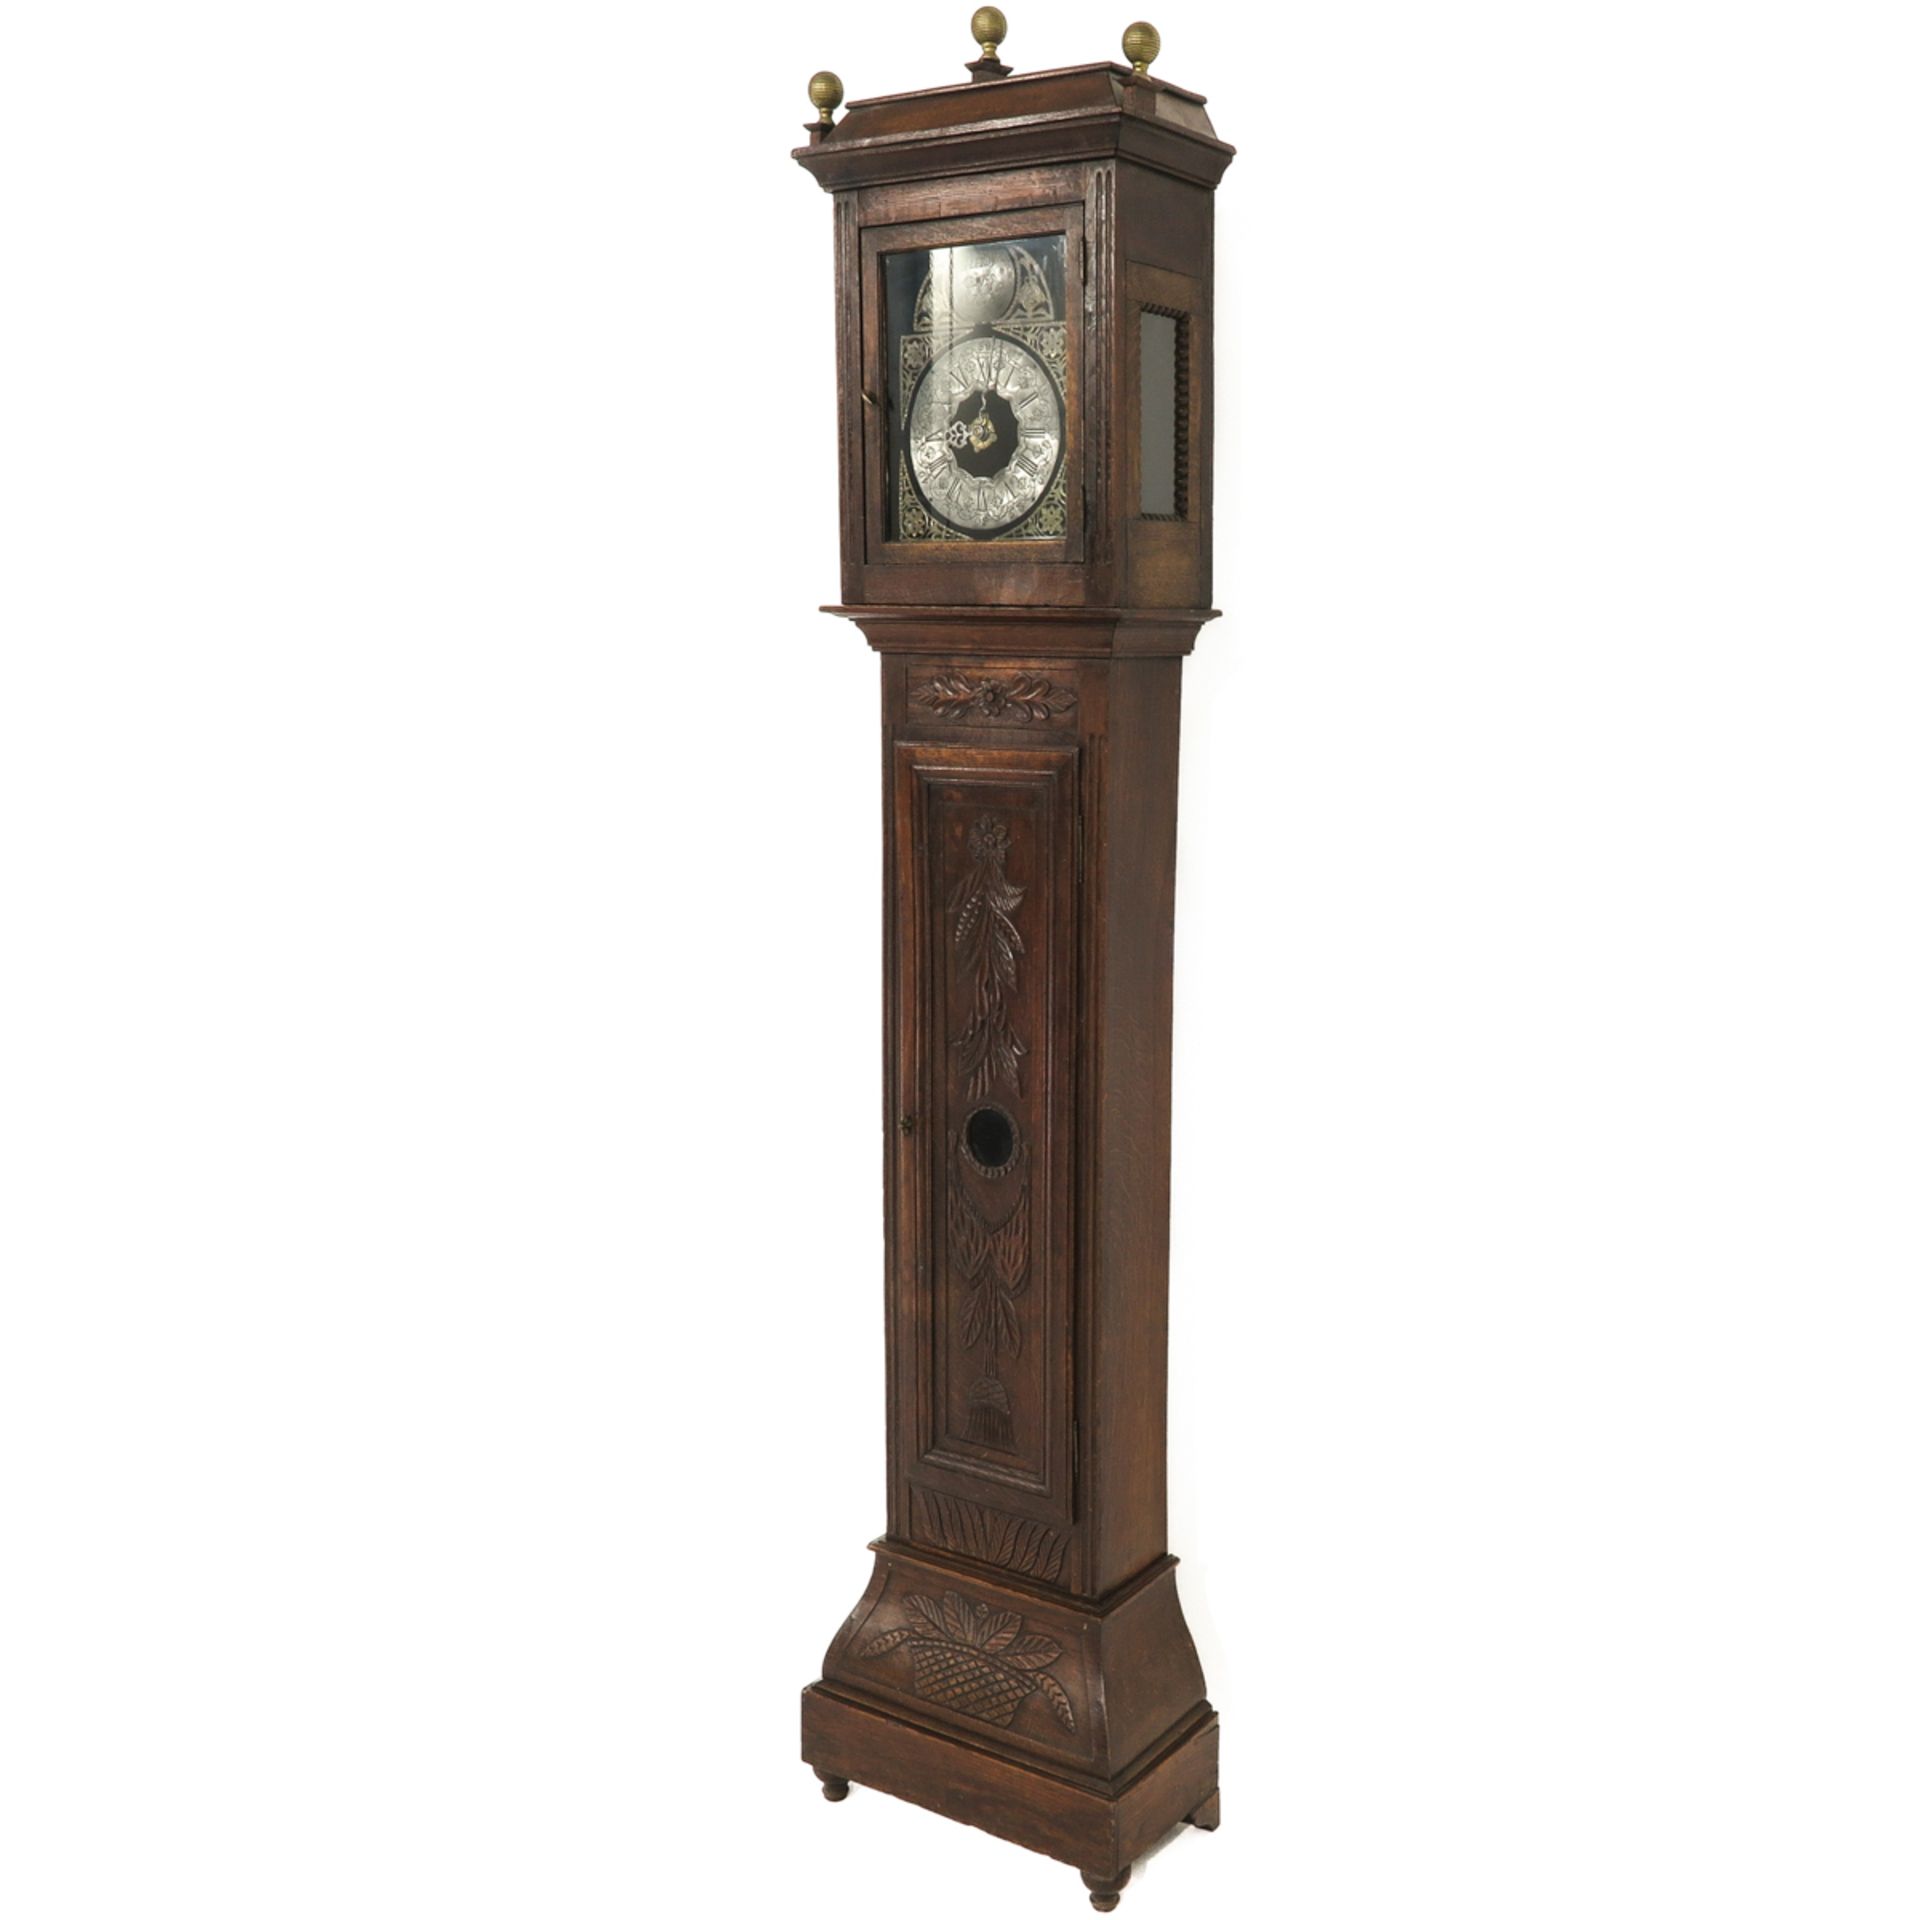 A Standing Clock Signed C.I. LeRoy a Gesves - Image 3 of 10